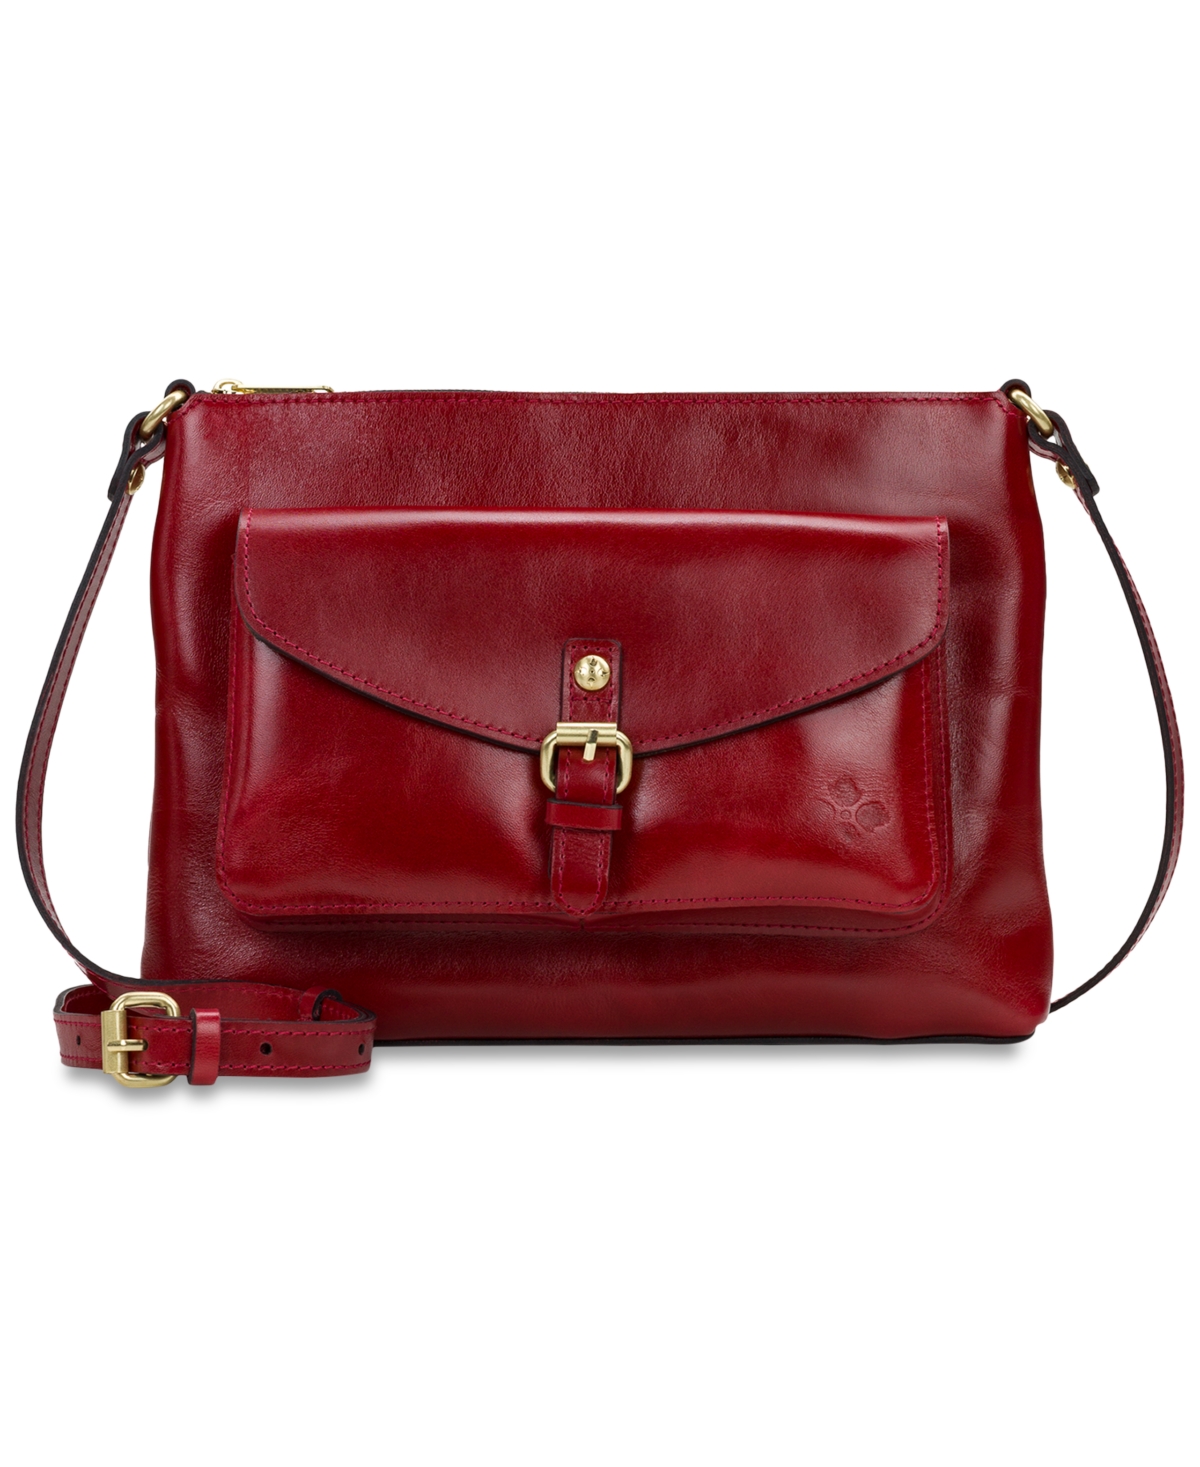 PATRICIA NASH KIRBY EAST WEST LEATHER CROSSBODY